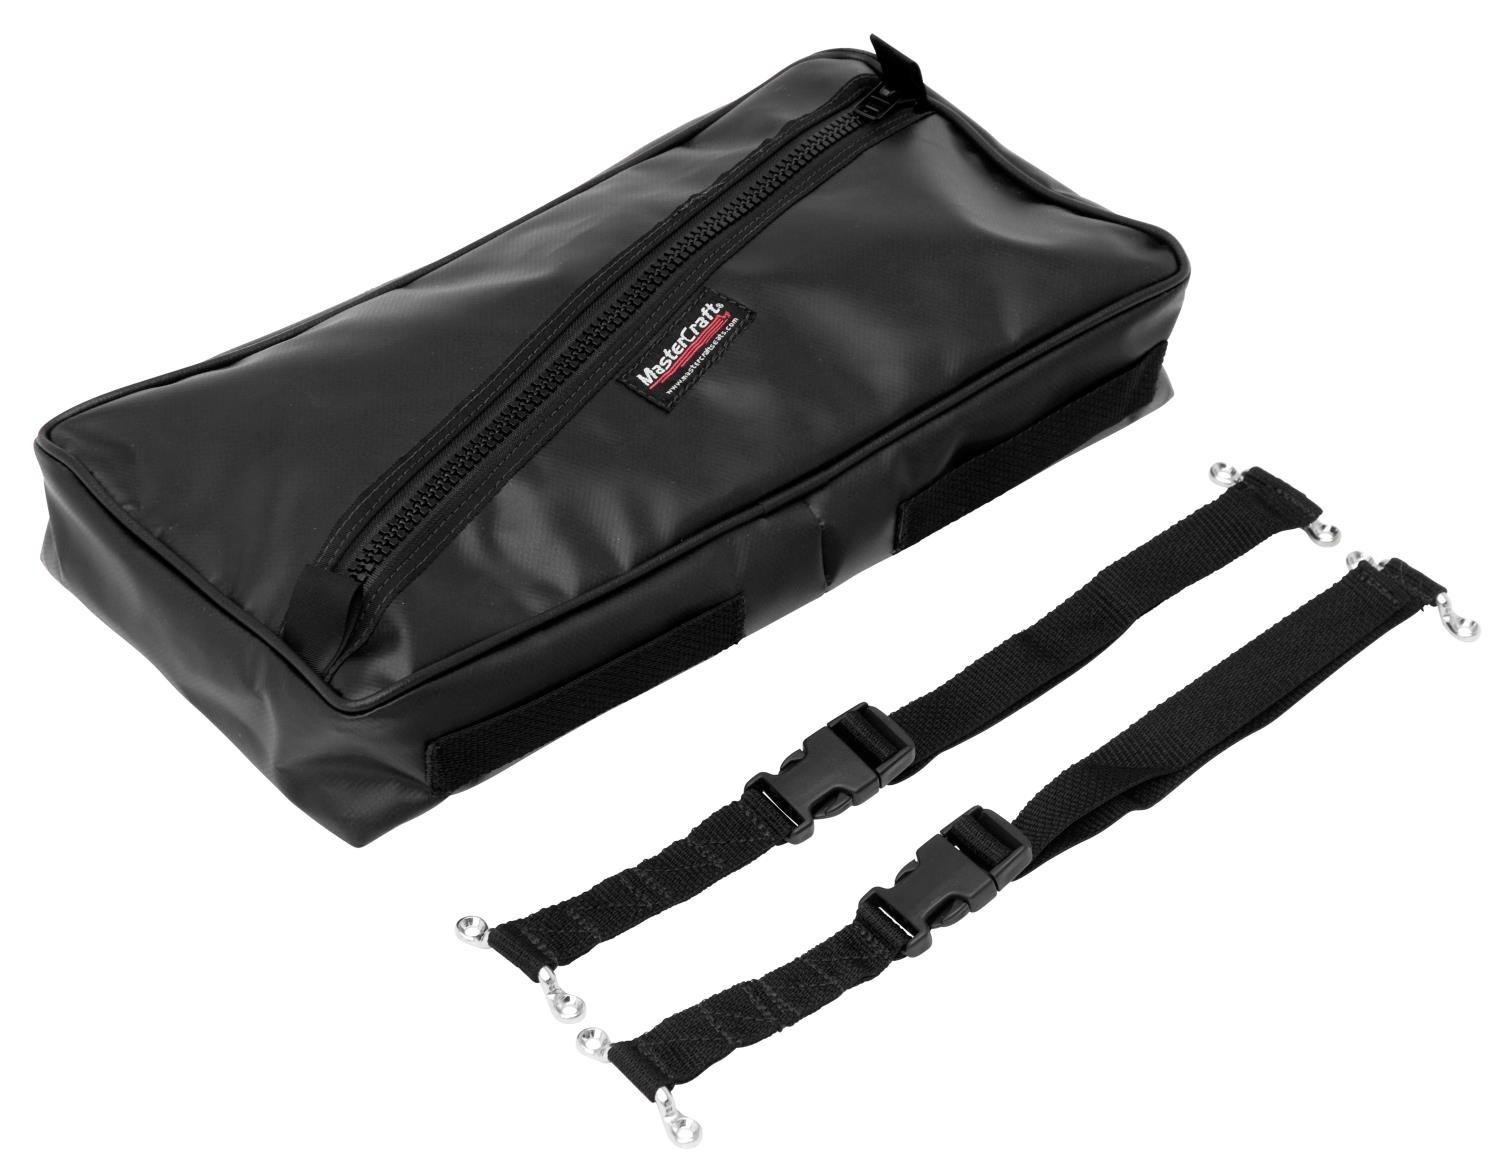 640111 Tool Tote, Large, 17x 8 x 3 1/2 with 2 bag straps, Black